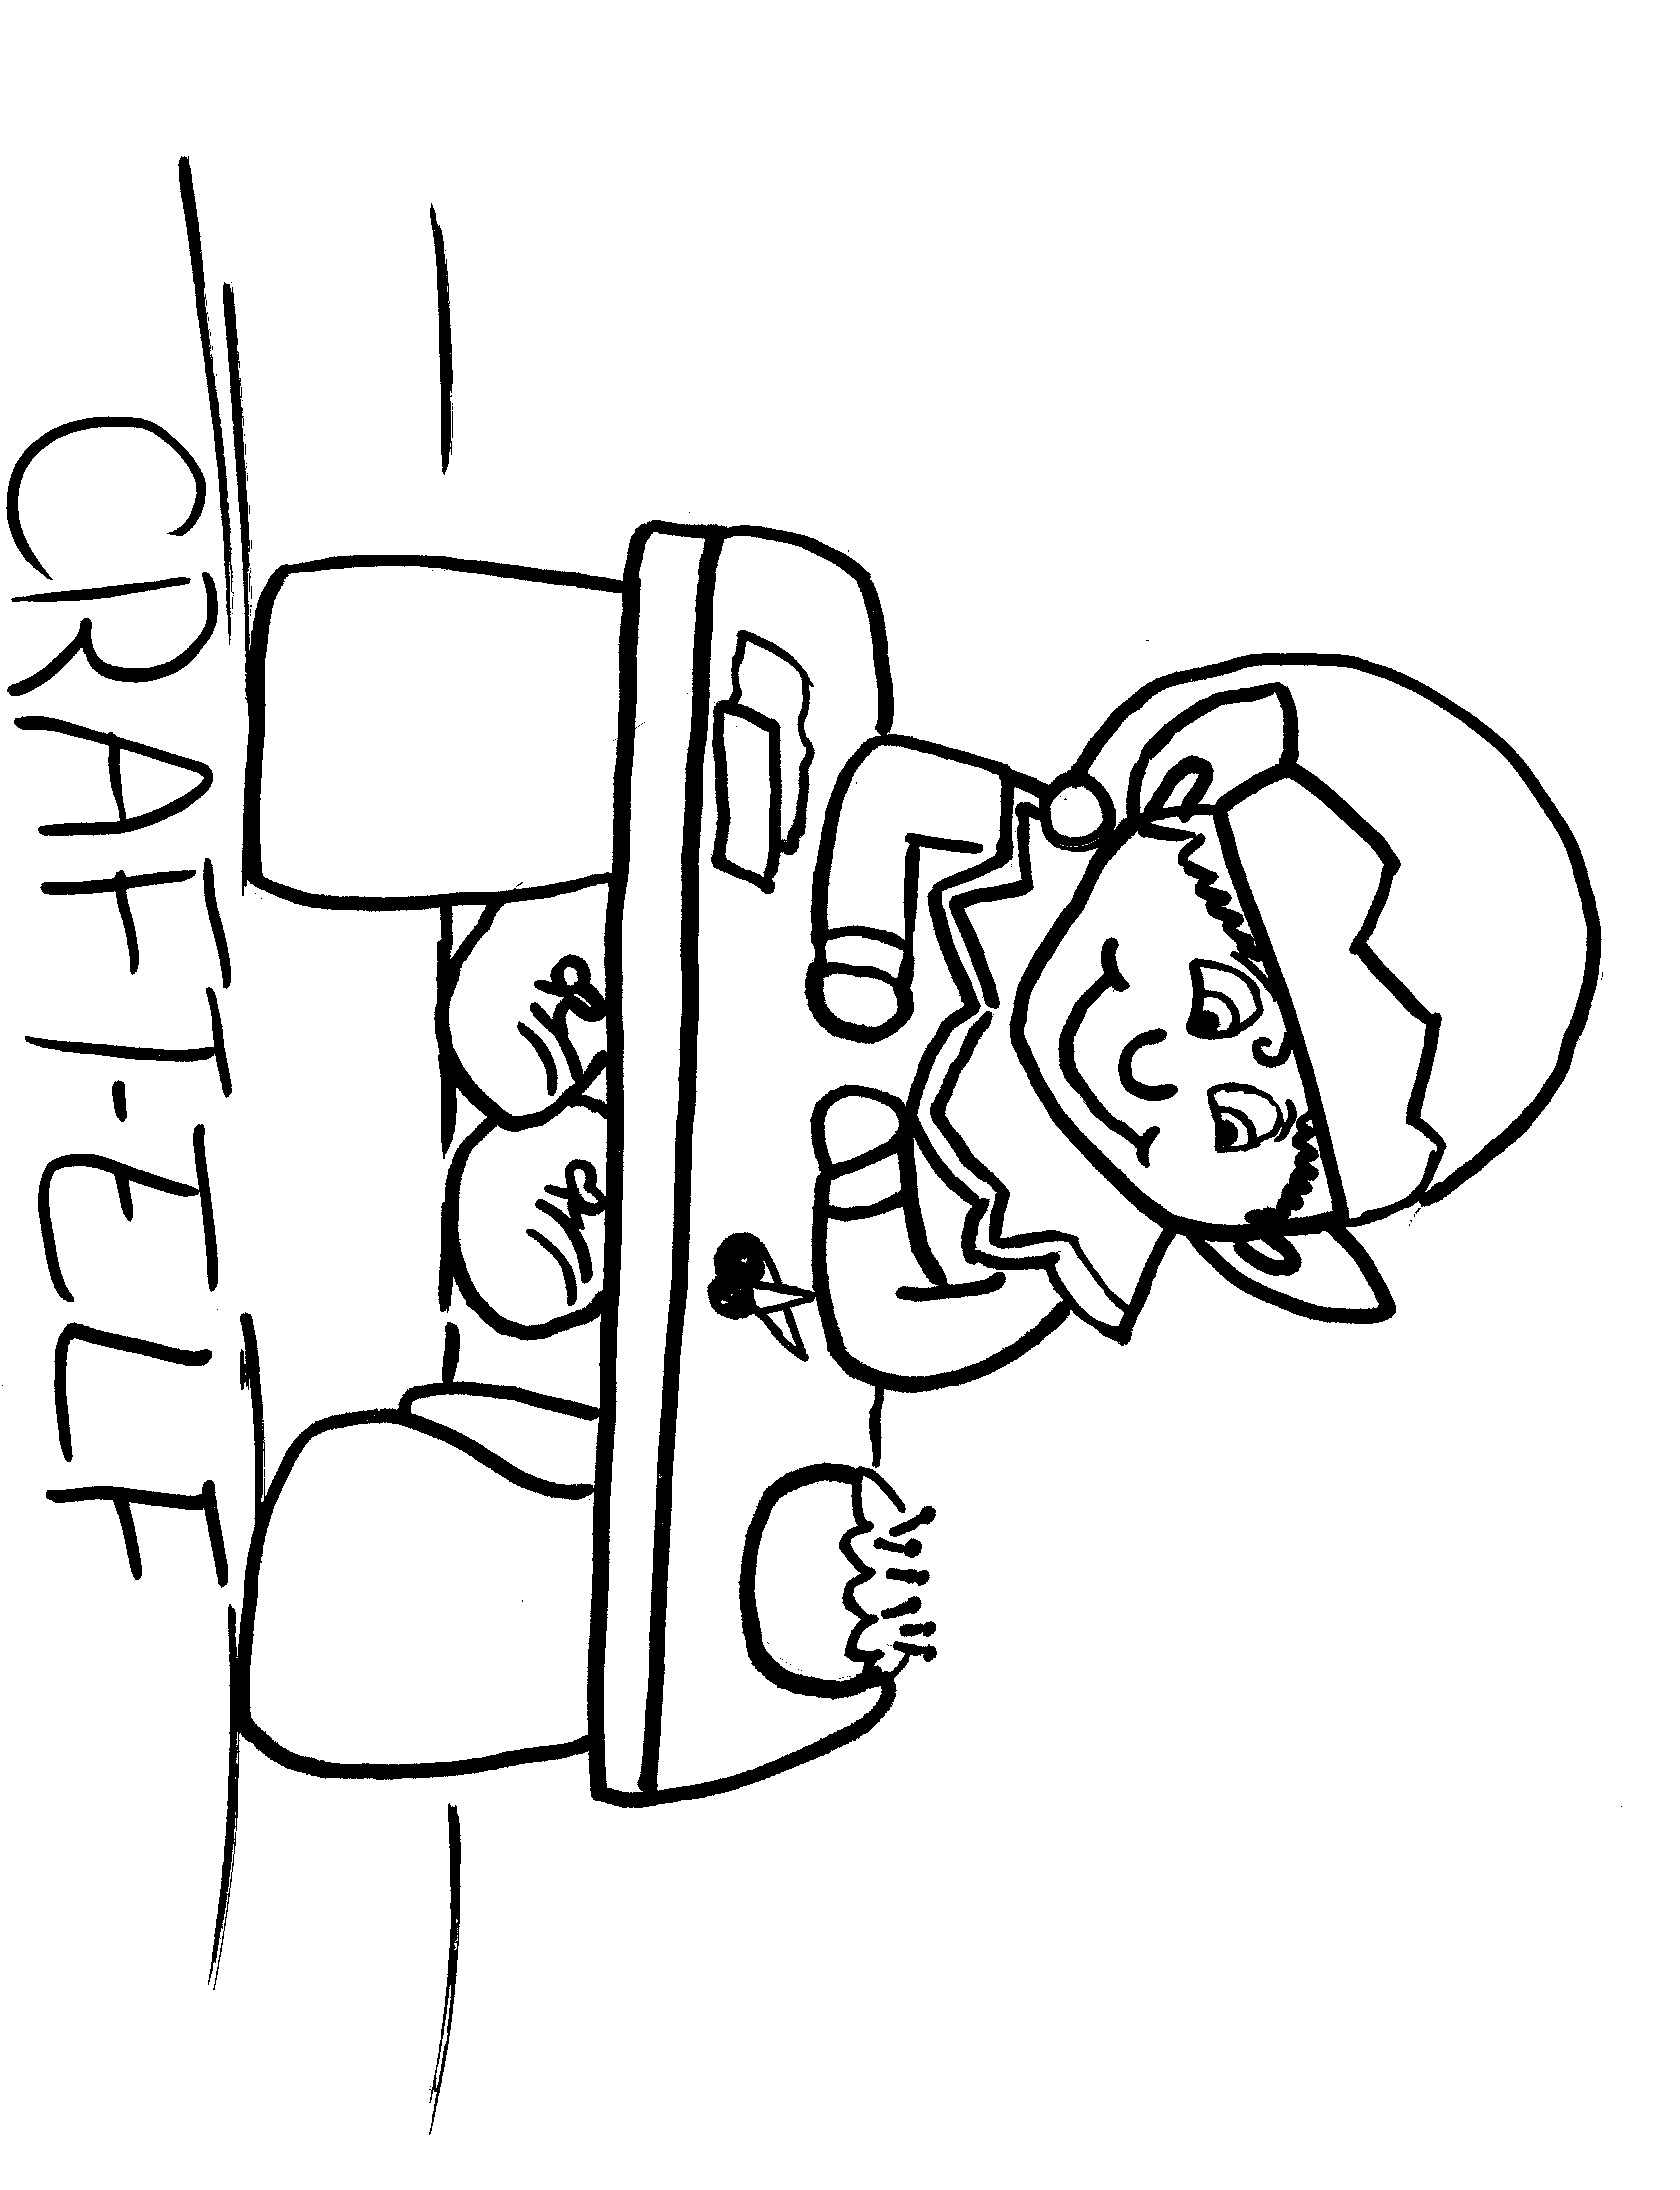 Free coloring page of "the Craft Elf"